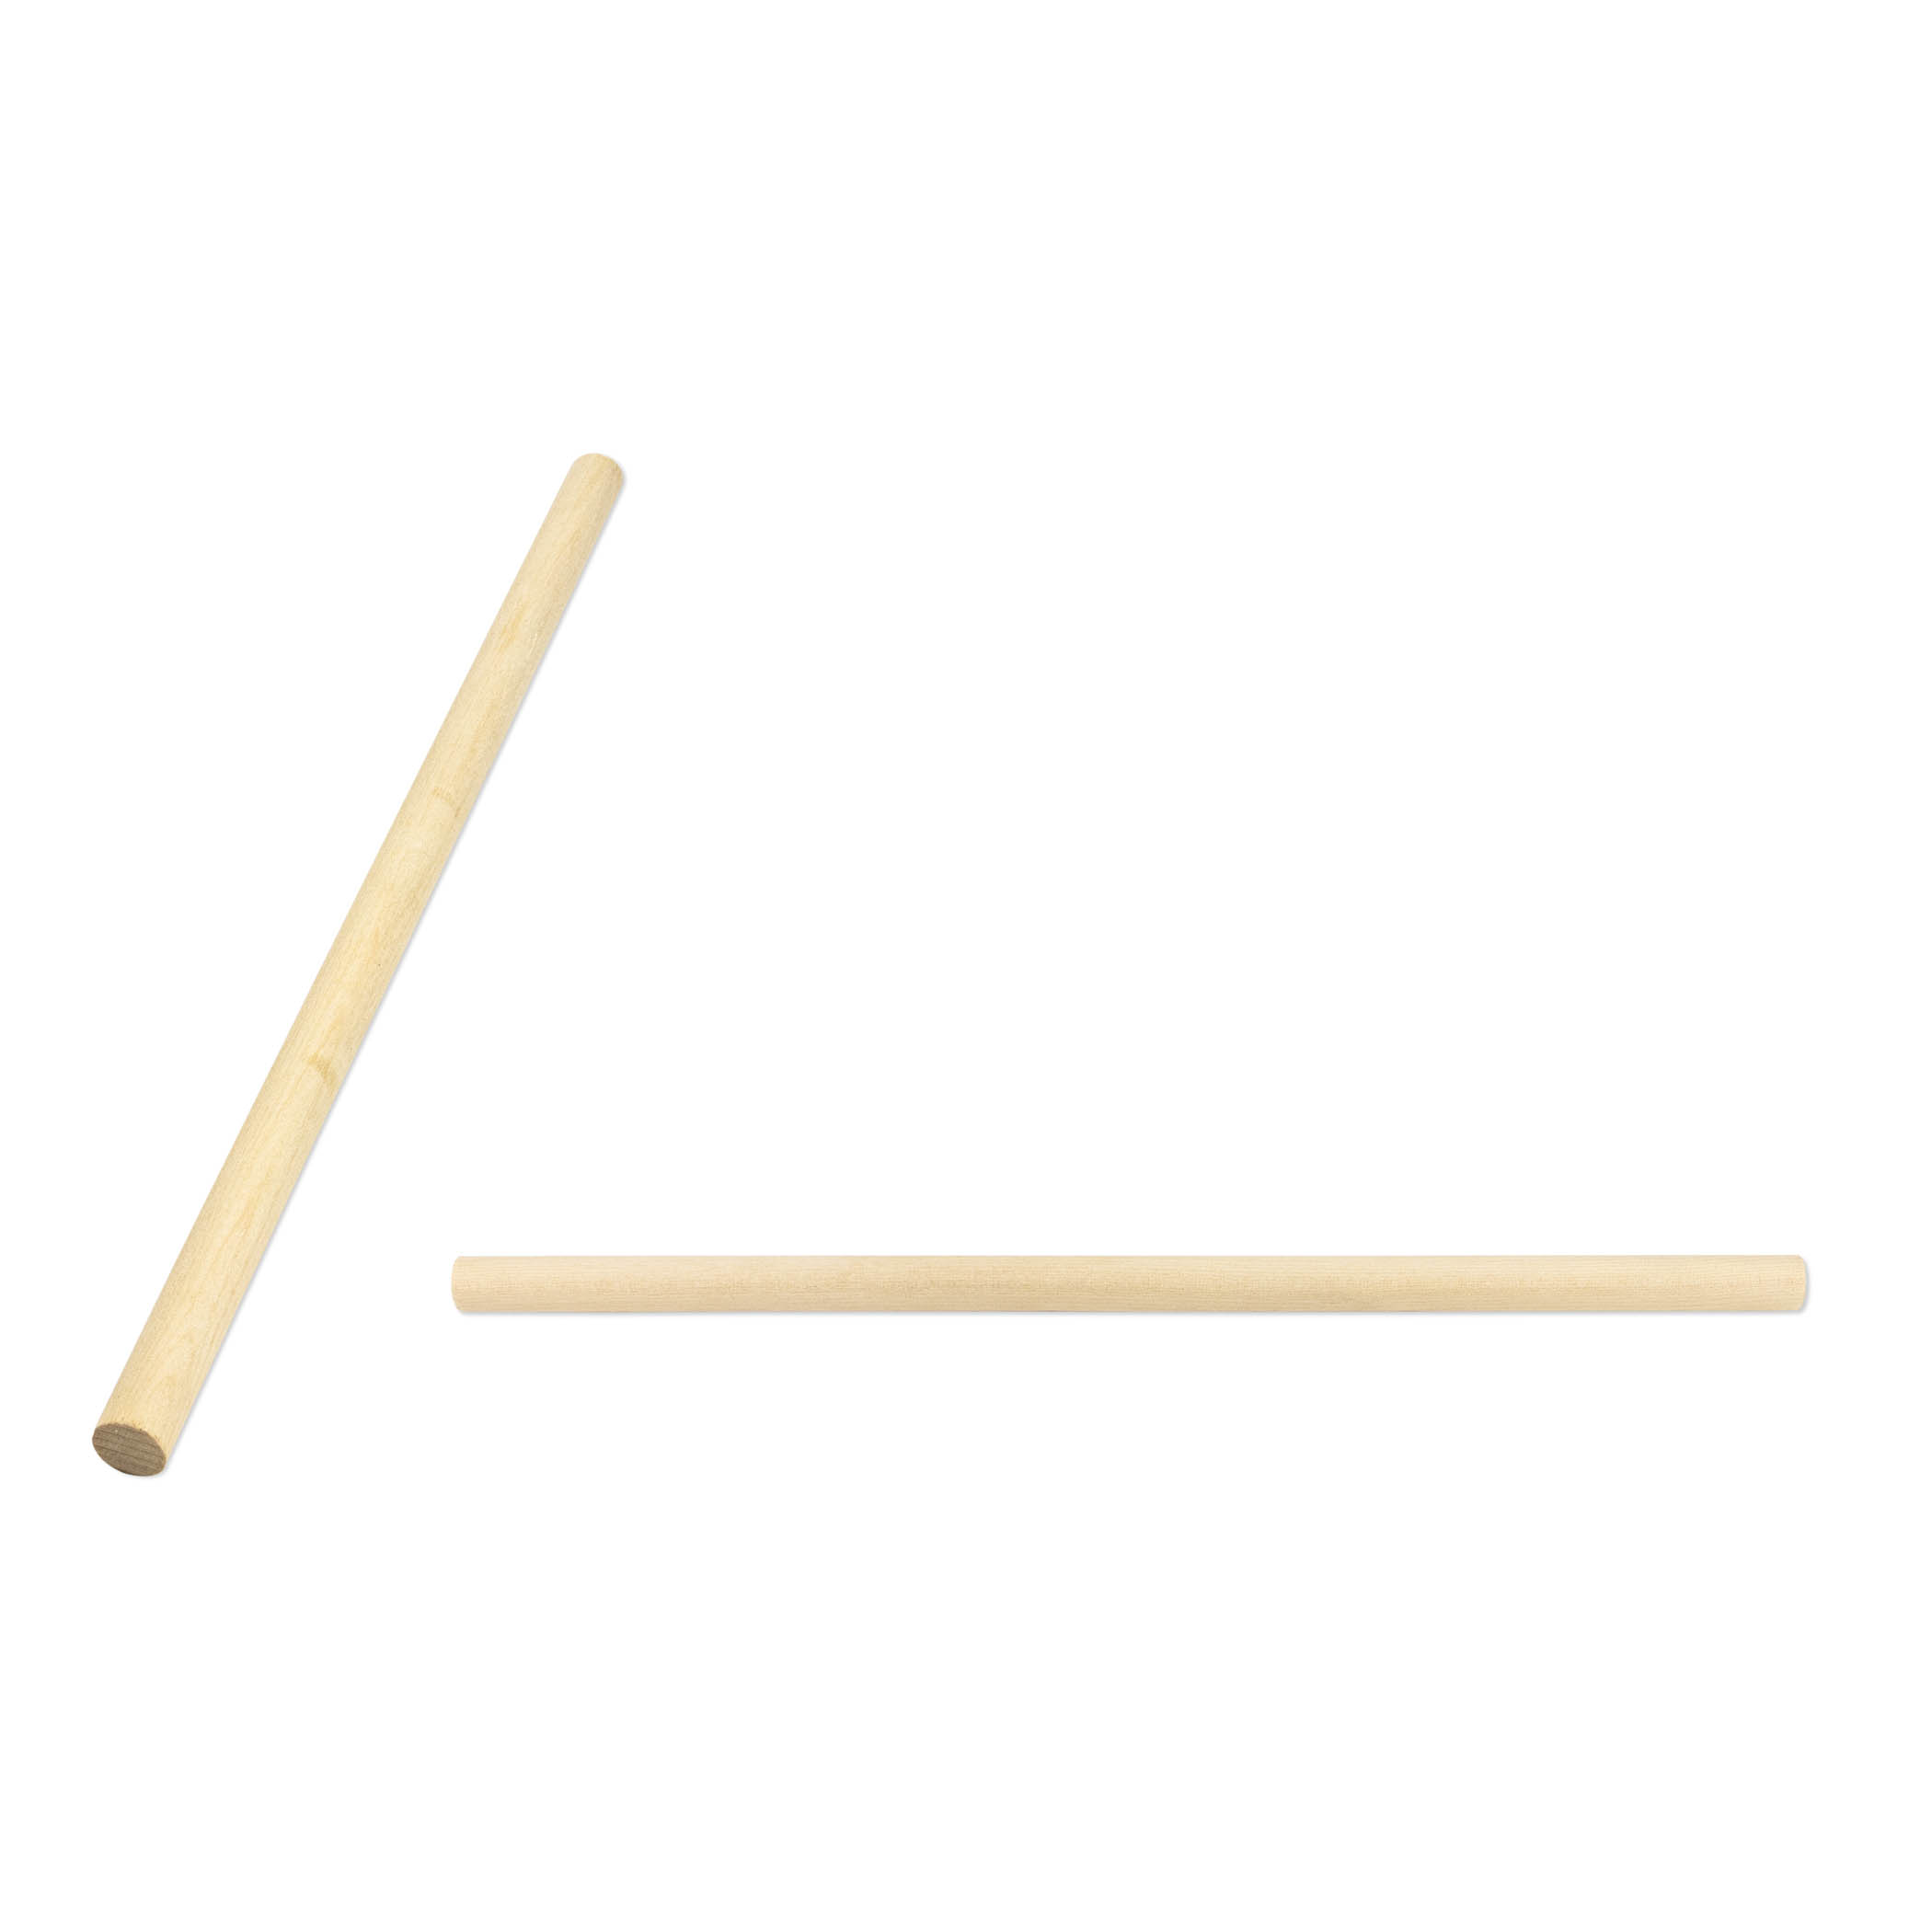 Wood Dowels, 3/4, 25 Pieces - HYG84342, Hygloss Products Inc.